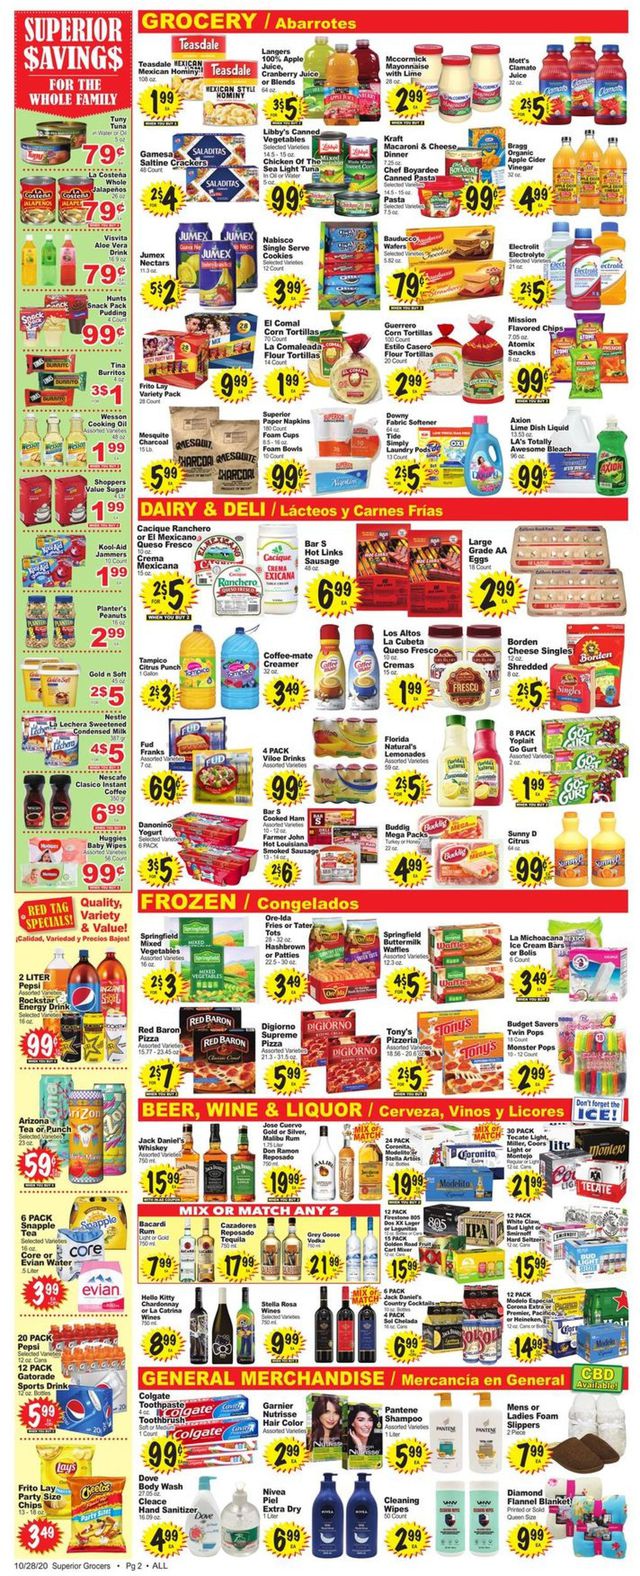 Superior Grocers Ad from 10/28/2020